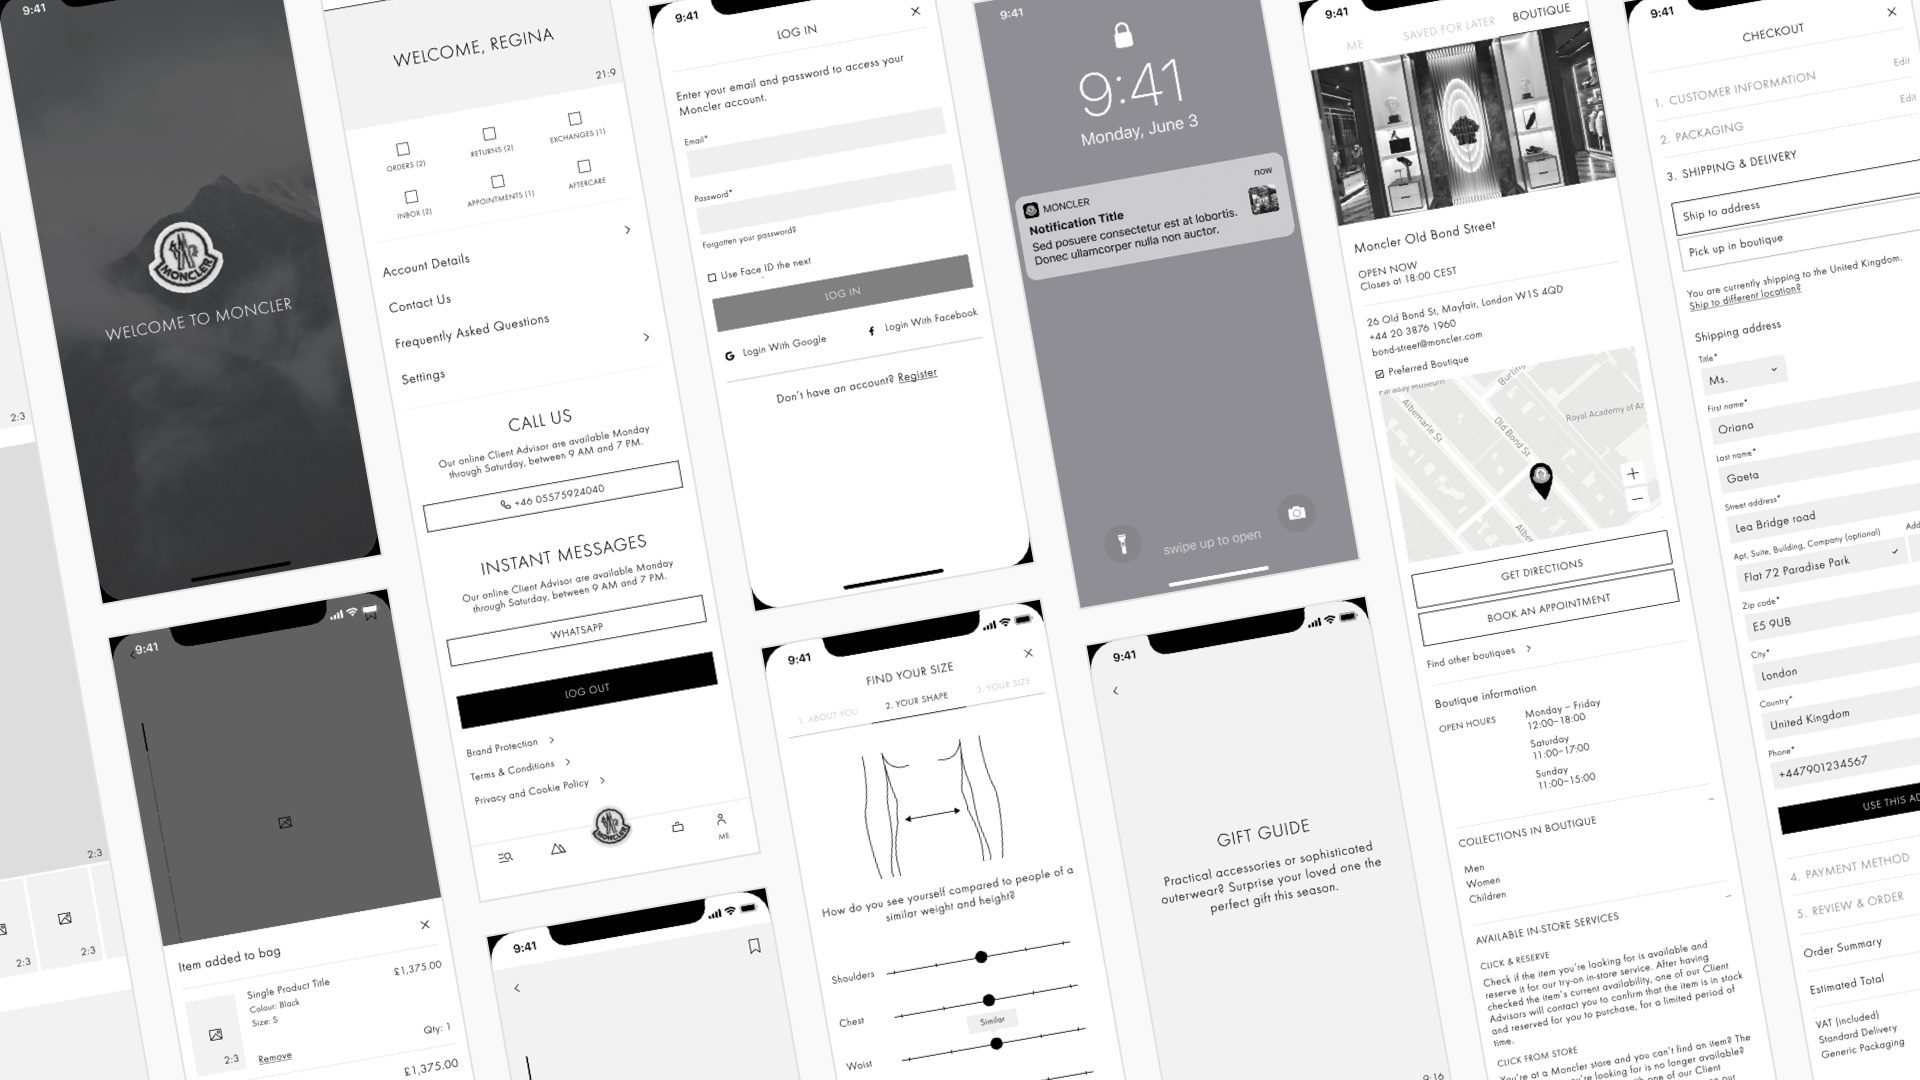 An assortment of wireframes from the Moncler mobile app